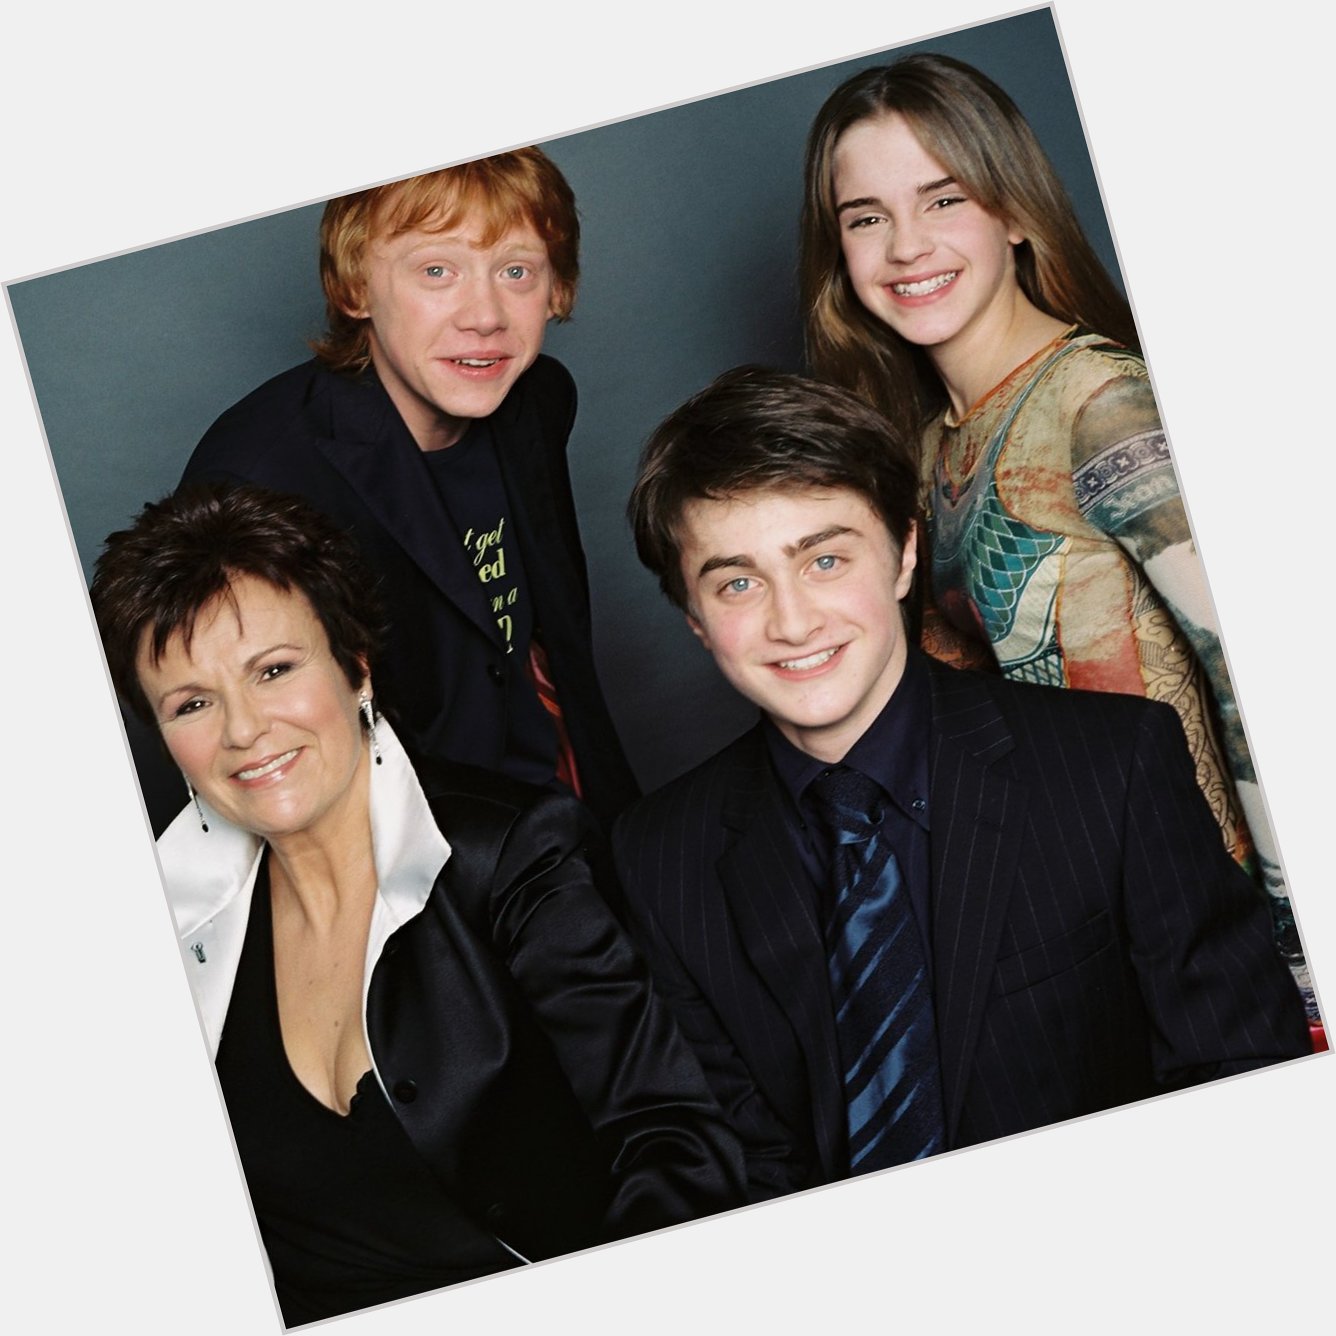 Happy birthday Daniel Radcliffe! Here he is at BAFTA events and awards throughout the years (they grow up so fast ) 